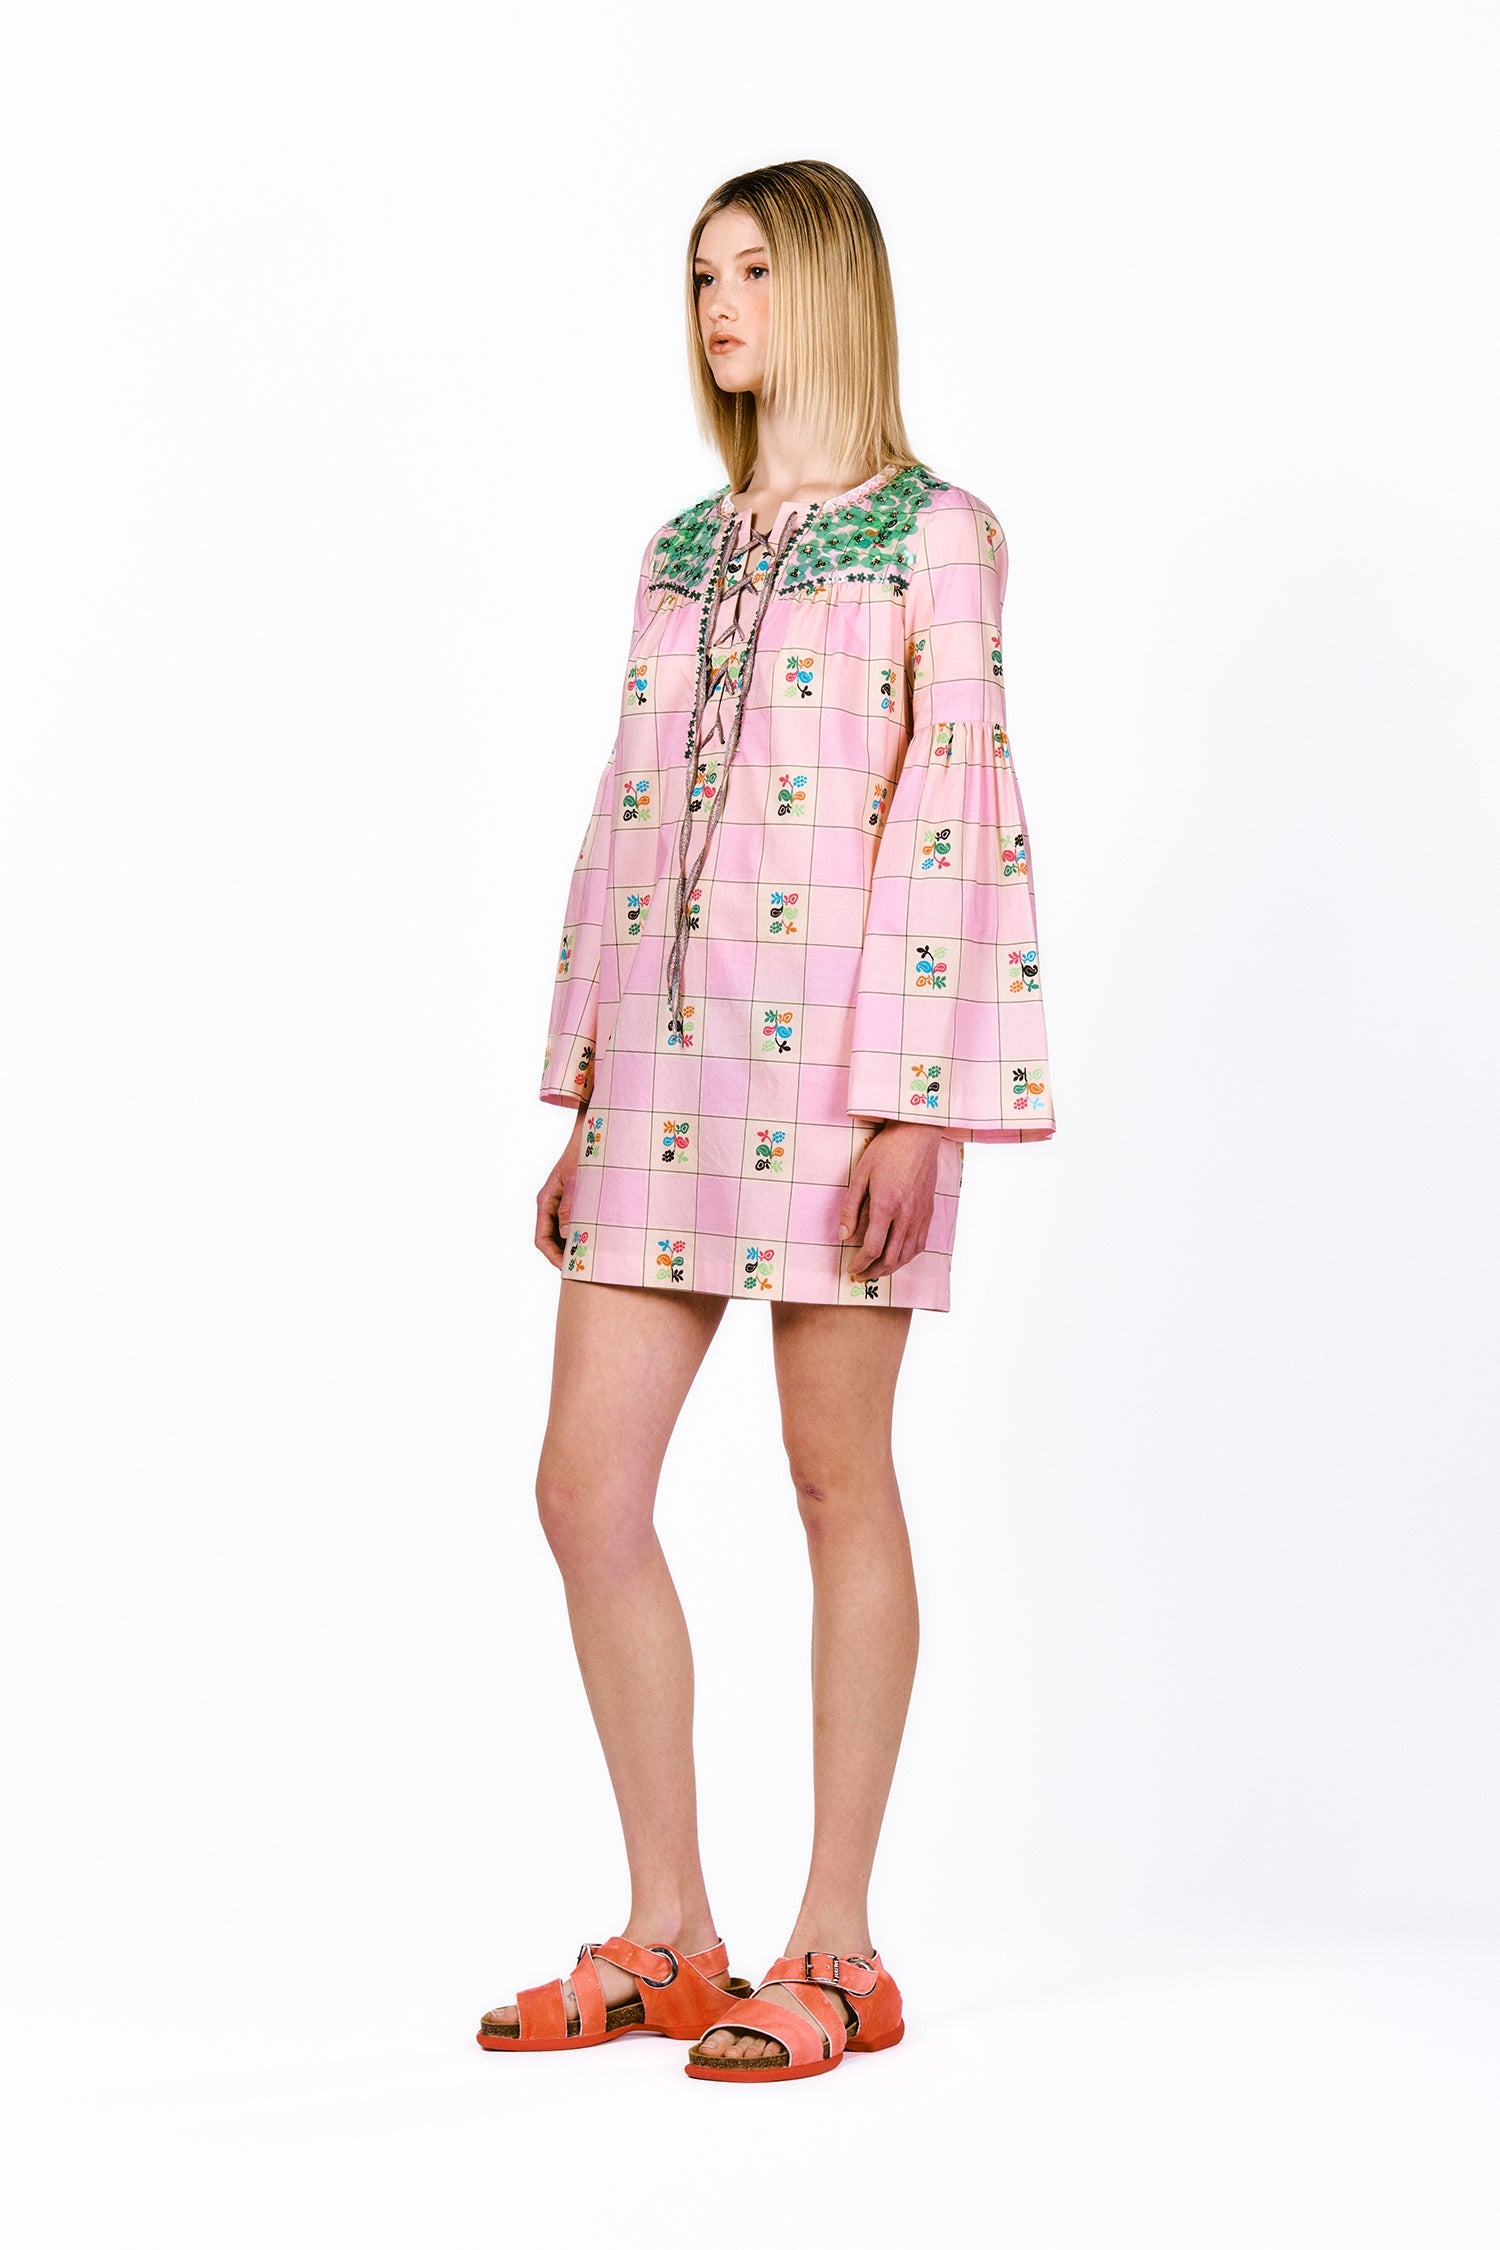 Giant Floral Gingham Embroidered Dress is long sleeves and mid-thigh long